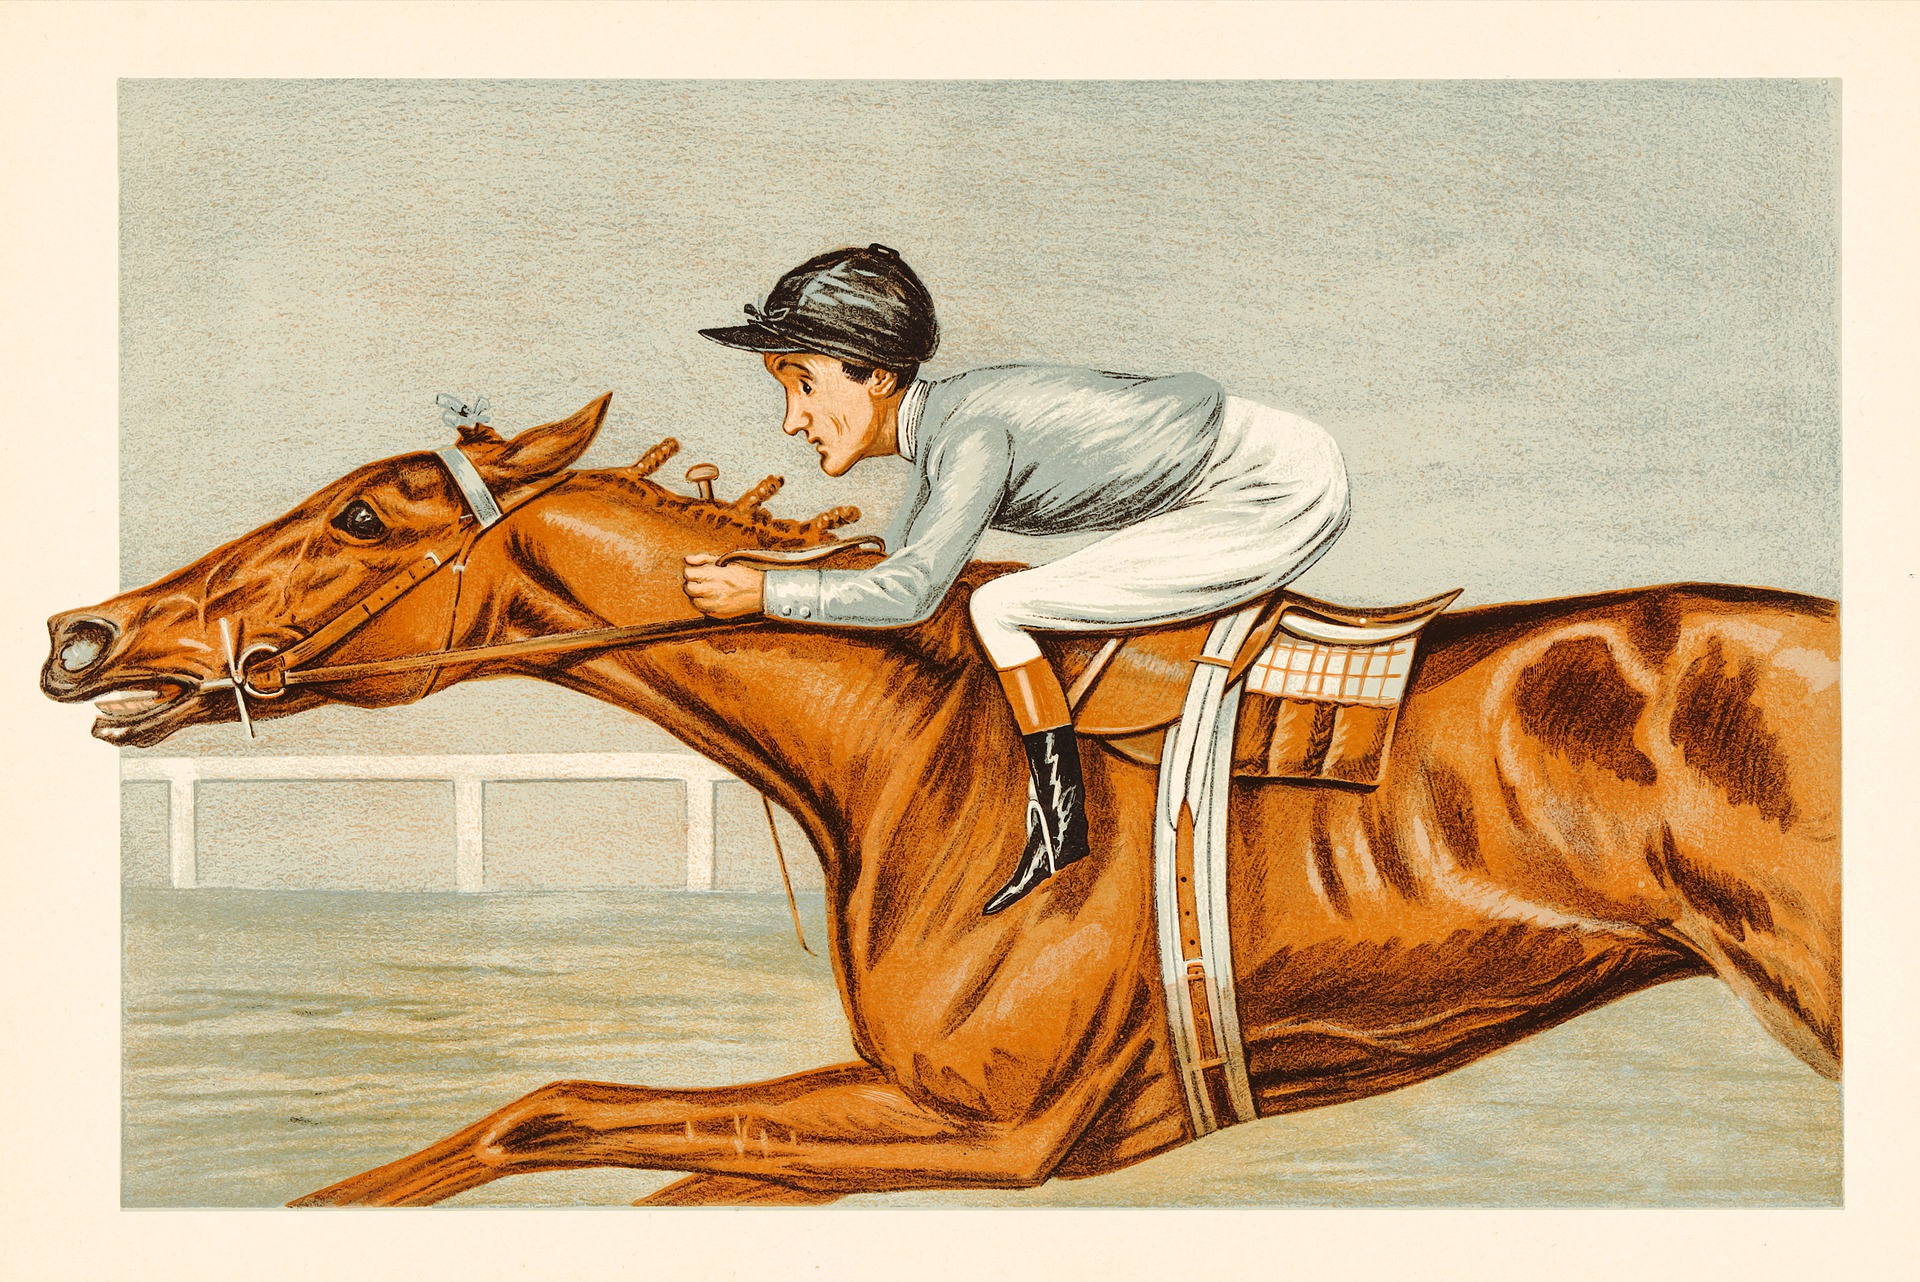 Painting of a jockey riding a horse